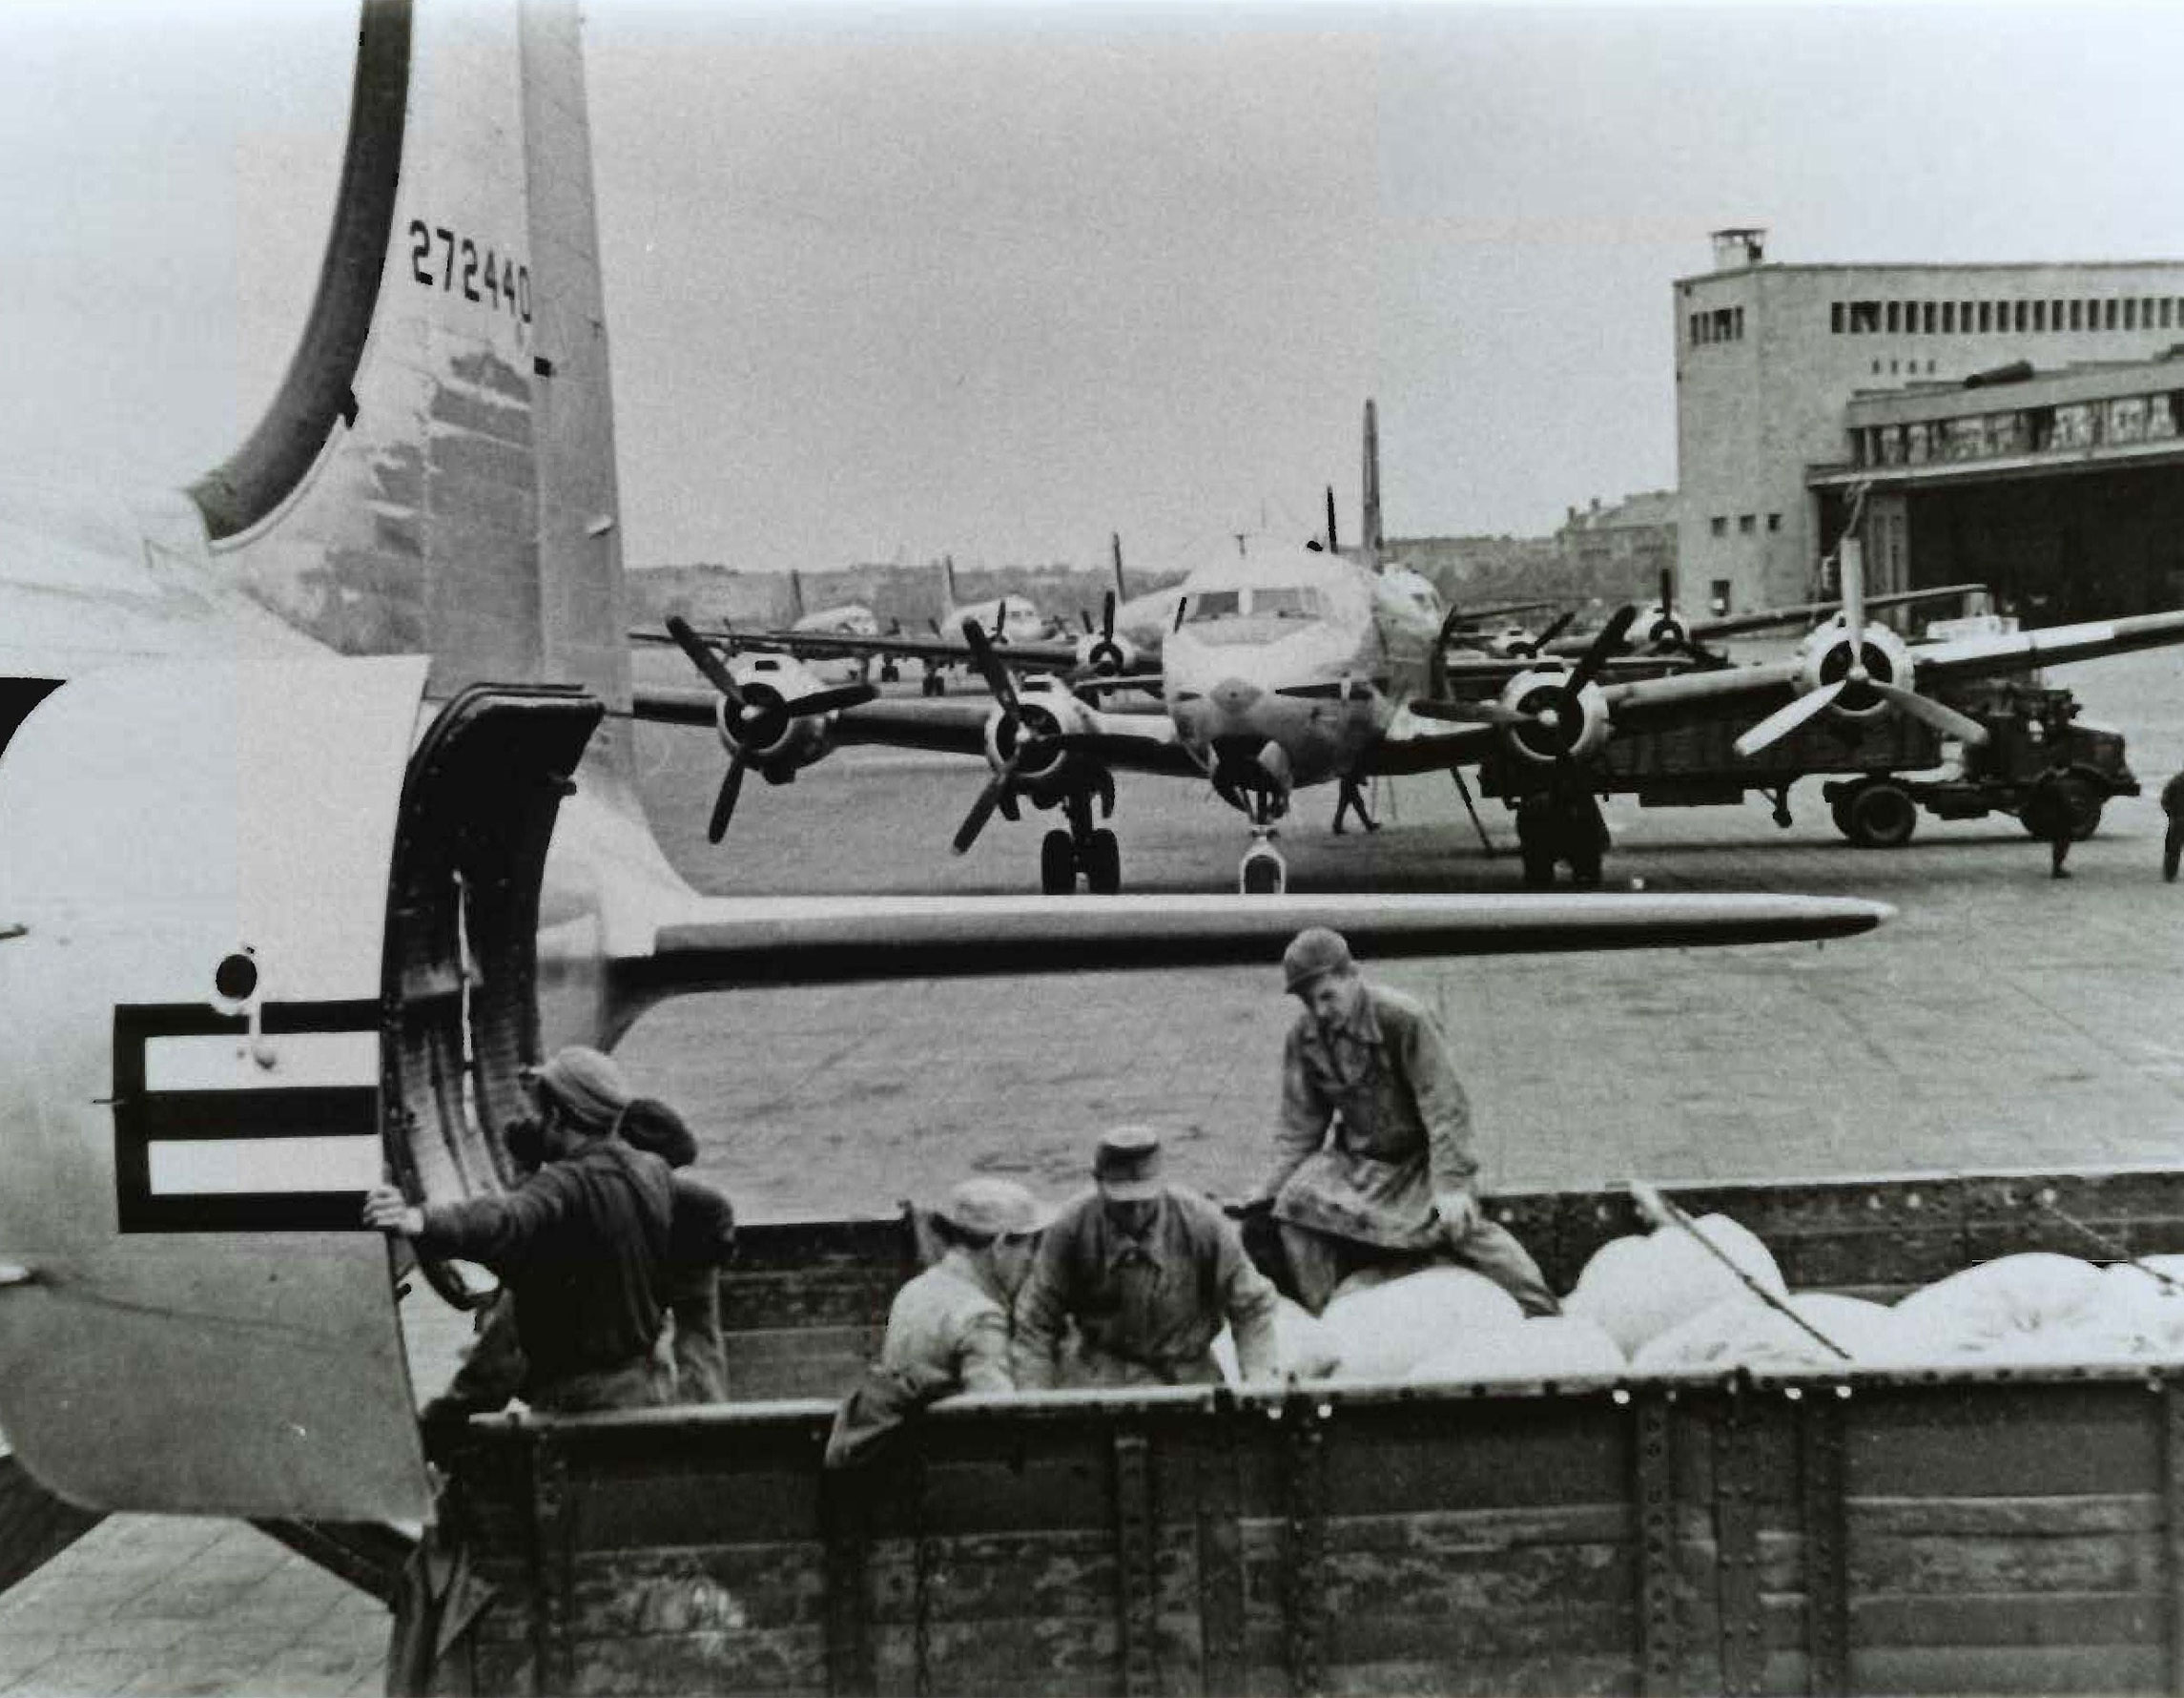 Historical image of men loading up airplanes for the Berlin Airlift